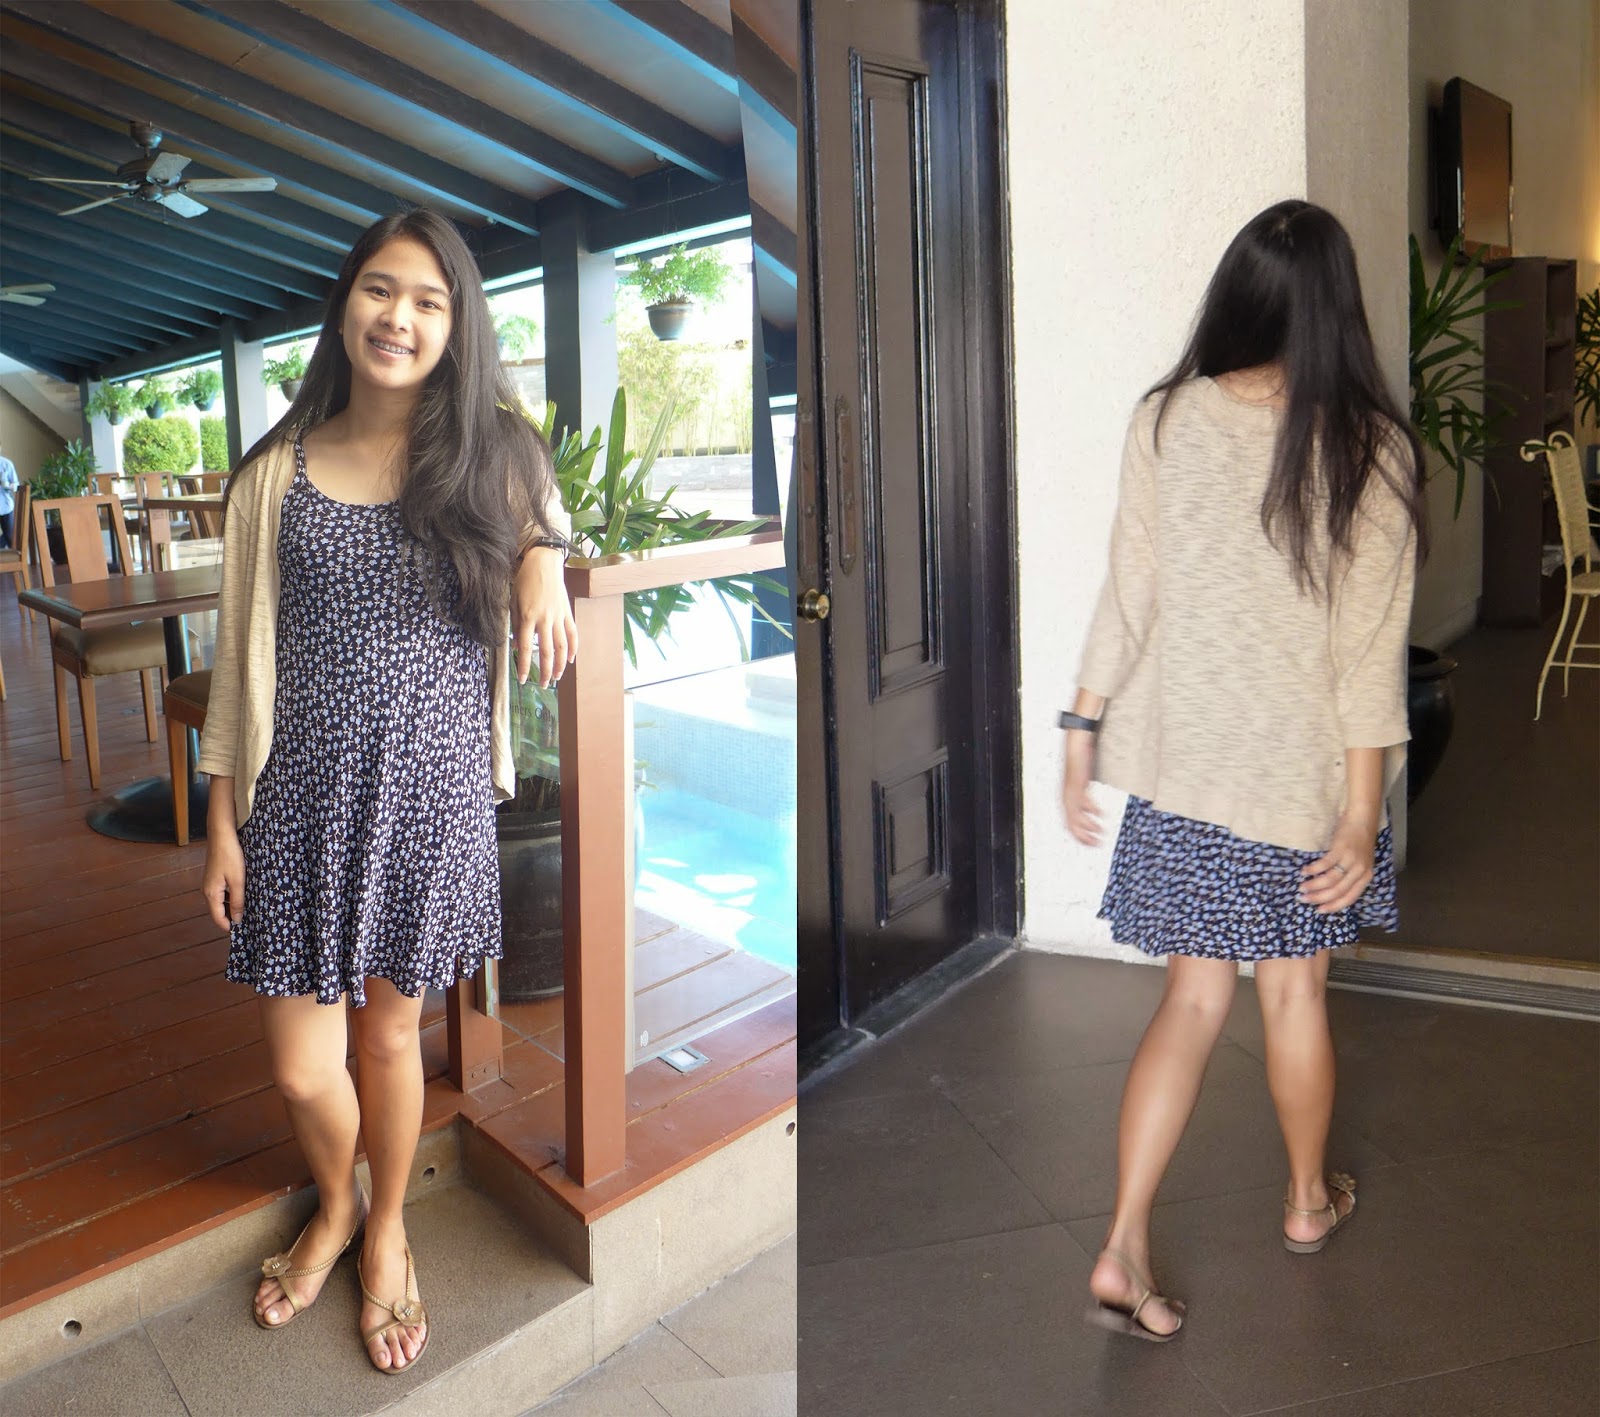 Dress: Marks & Spencer (old) | Cardigan: Thrifted | Sandals: Grendha (old) similar here | Watch: Casio (available at Zalora)